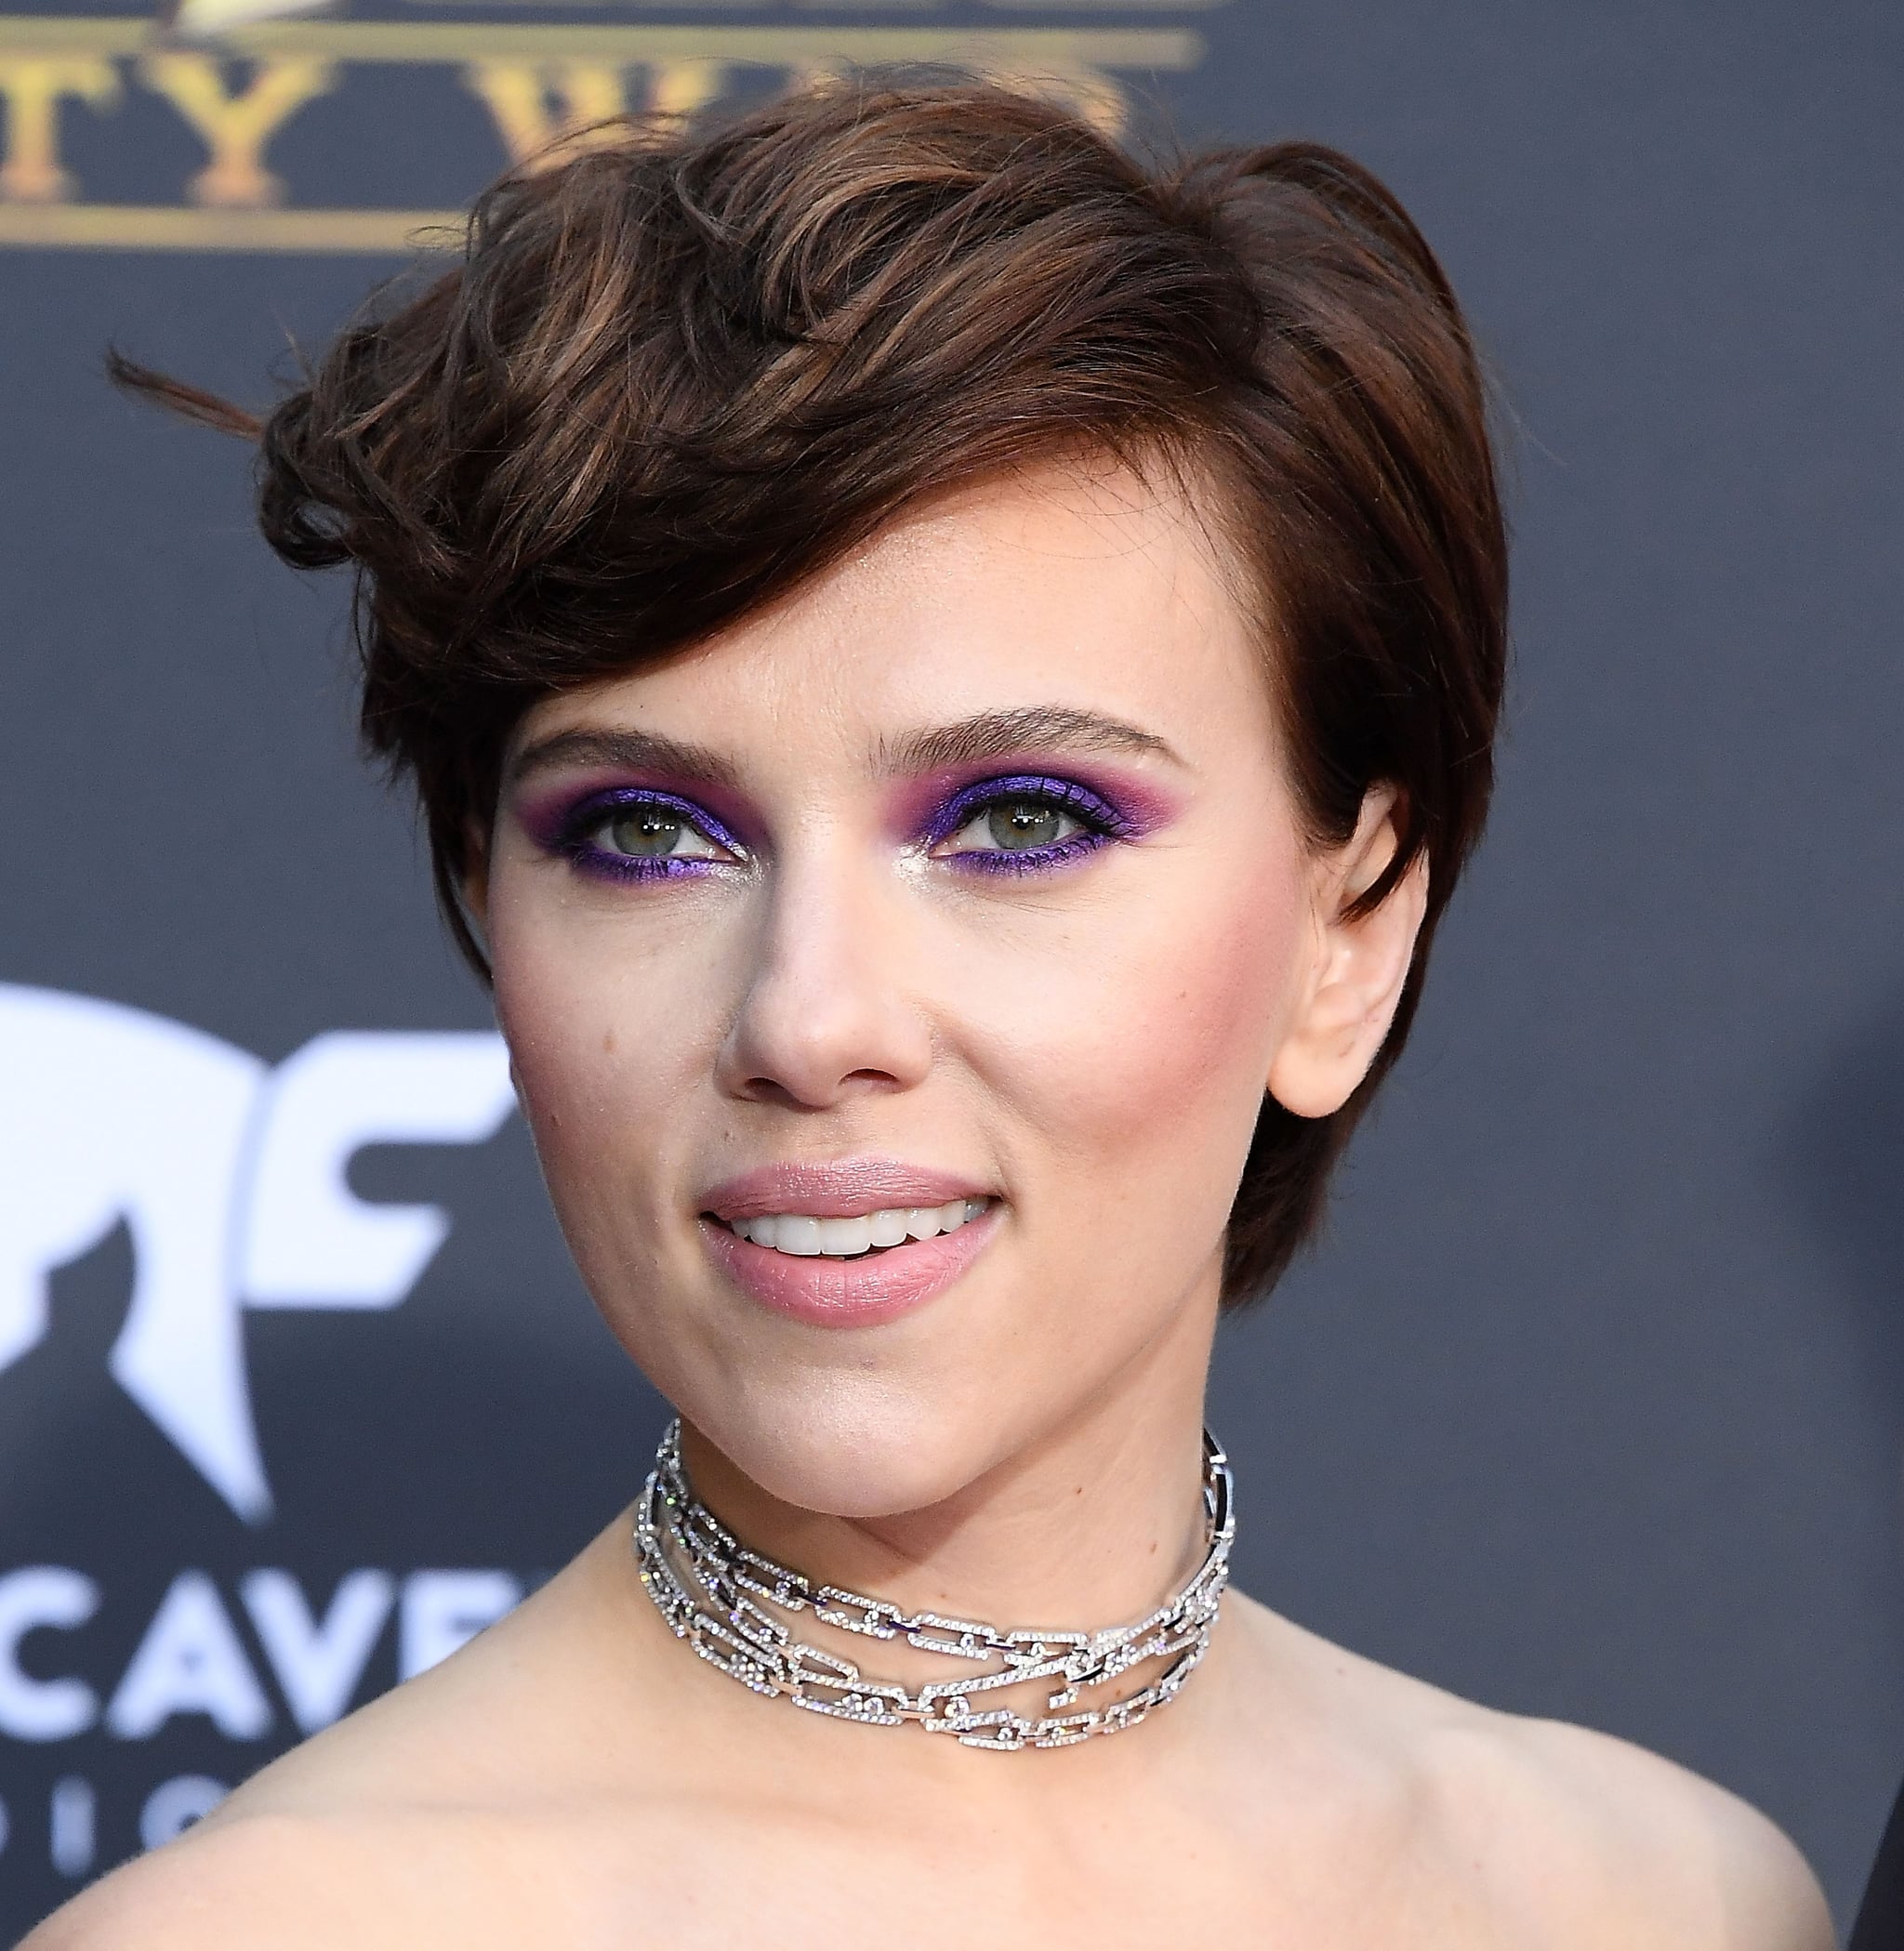 We're Loving How Her Hair Was Styled For the Avengers Premiere | Bye-Bye,  Blond! Scarlett Johansson Just Debuted a Drastic Hair Color Change |  POPSUGAR Beauty Photo 4